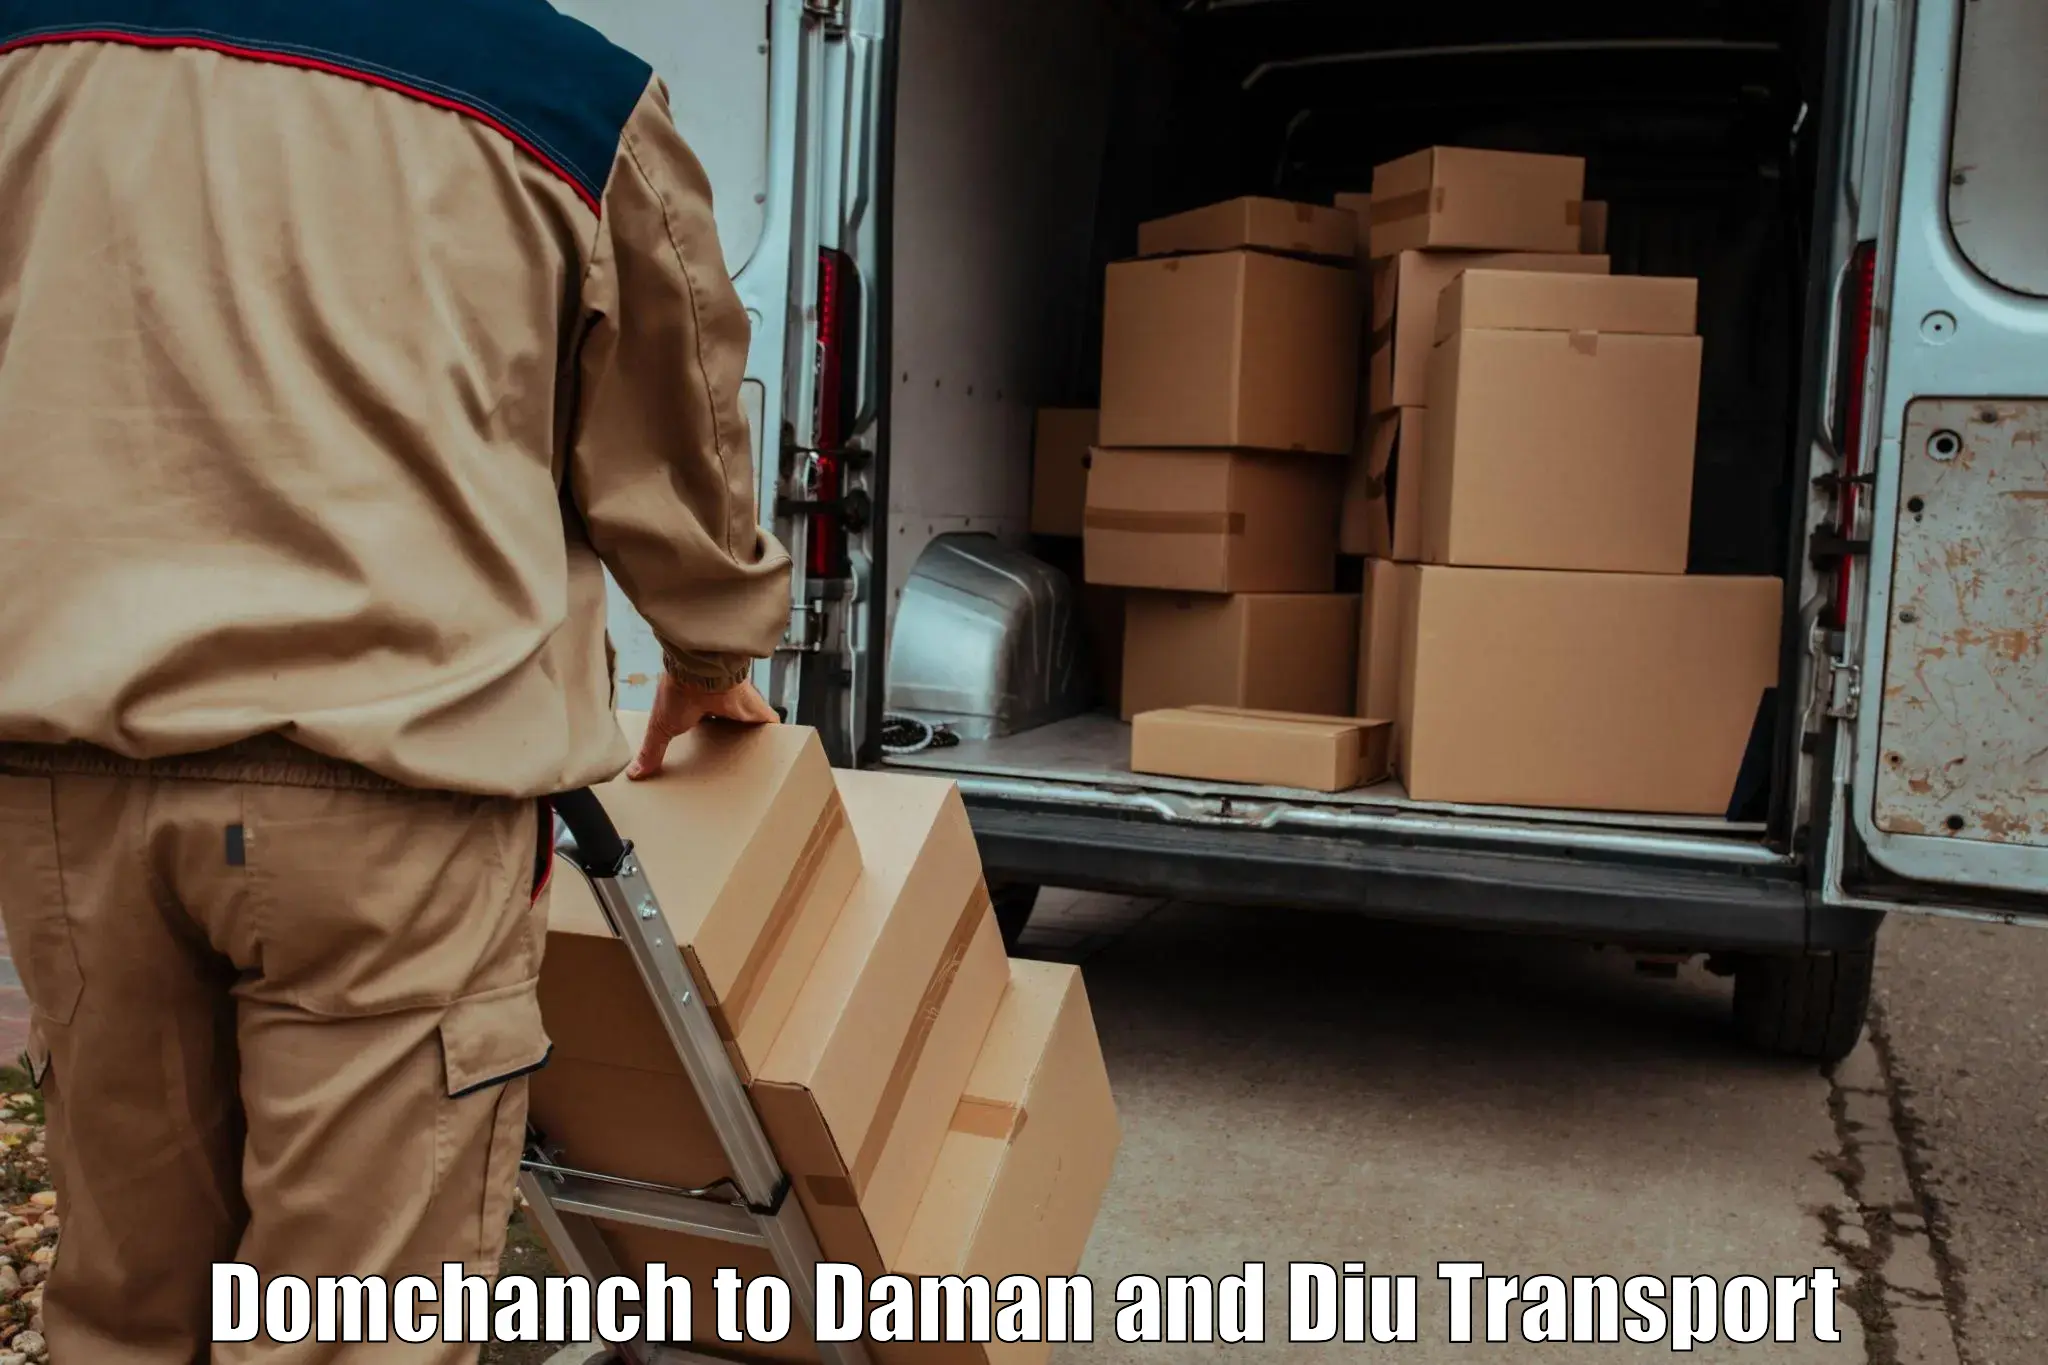 Bike transport service in Domchanch to Daman and Diu